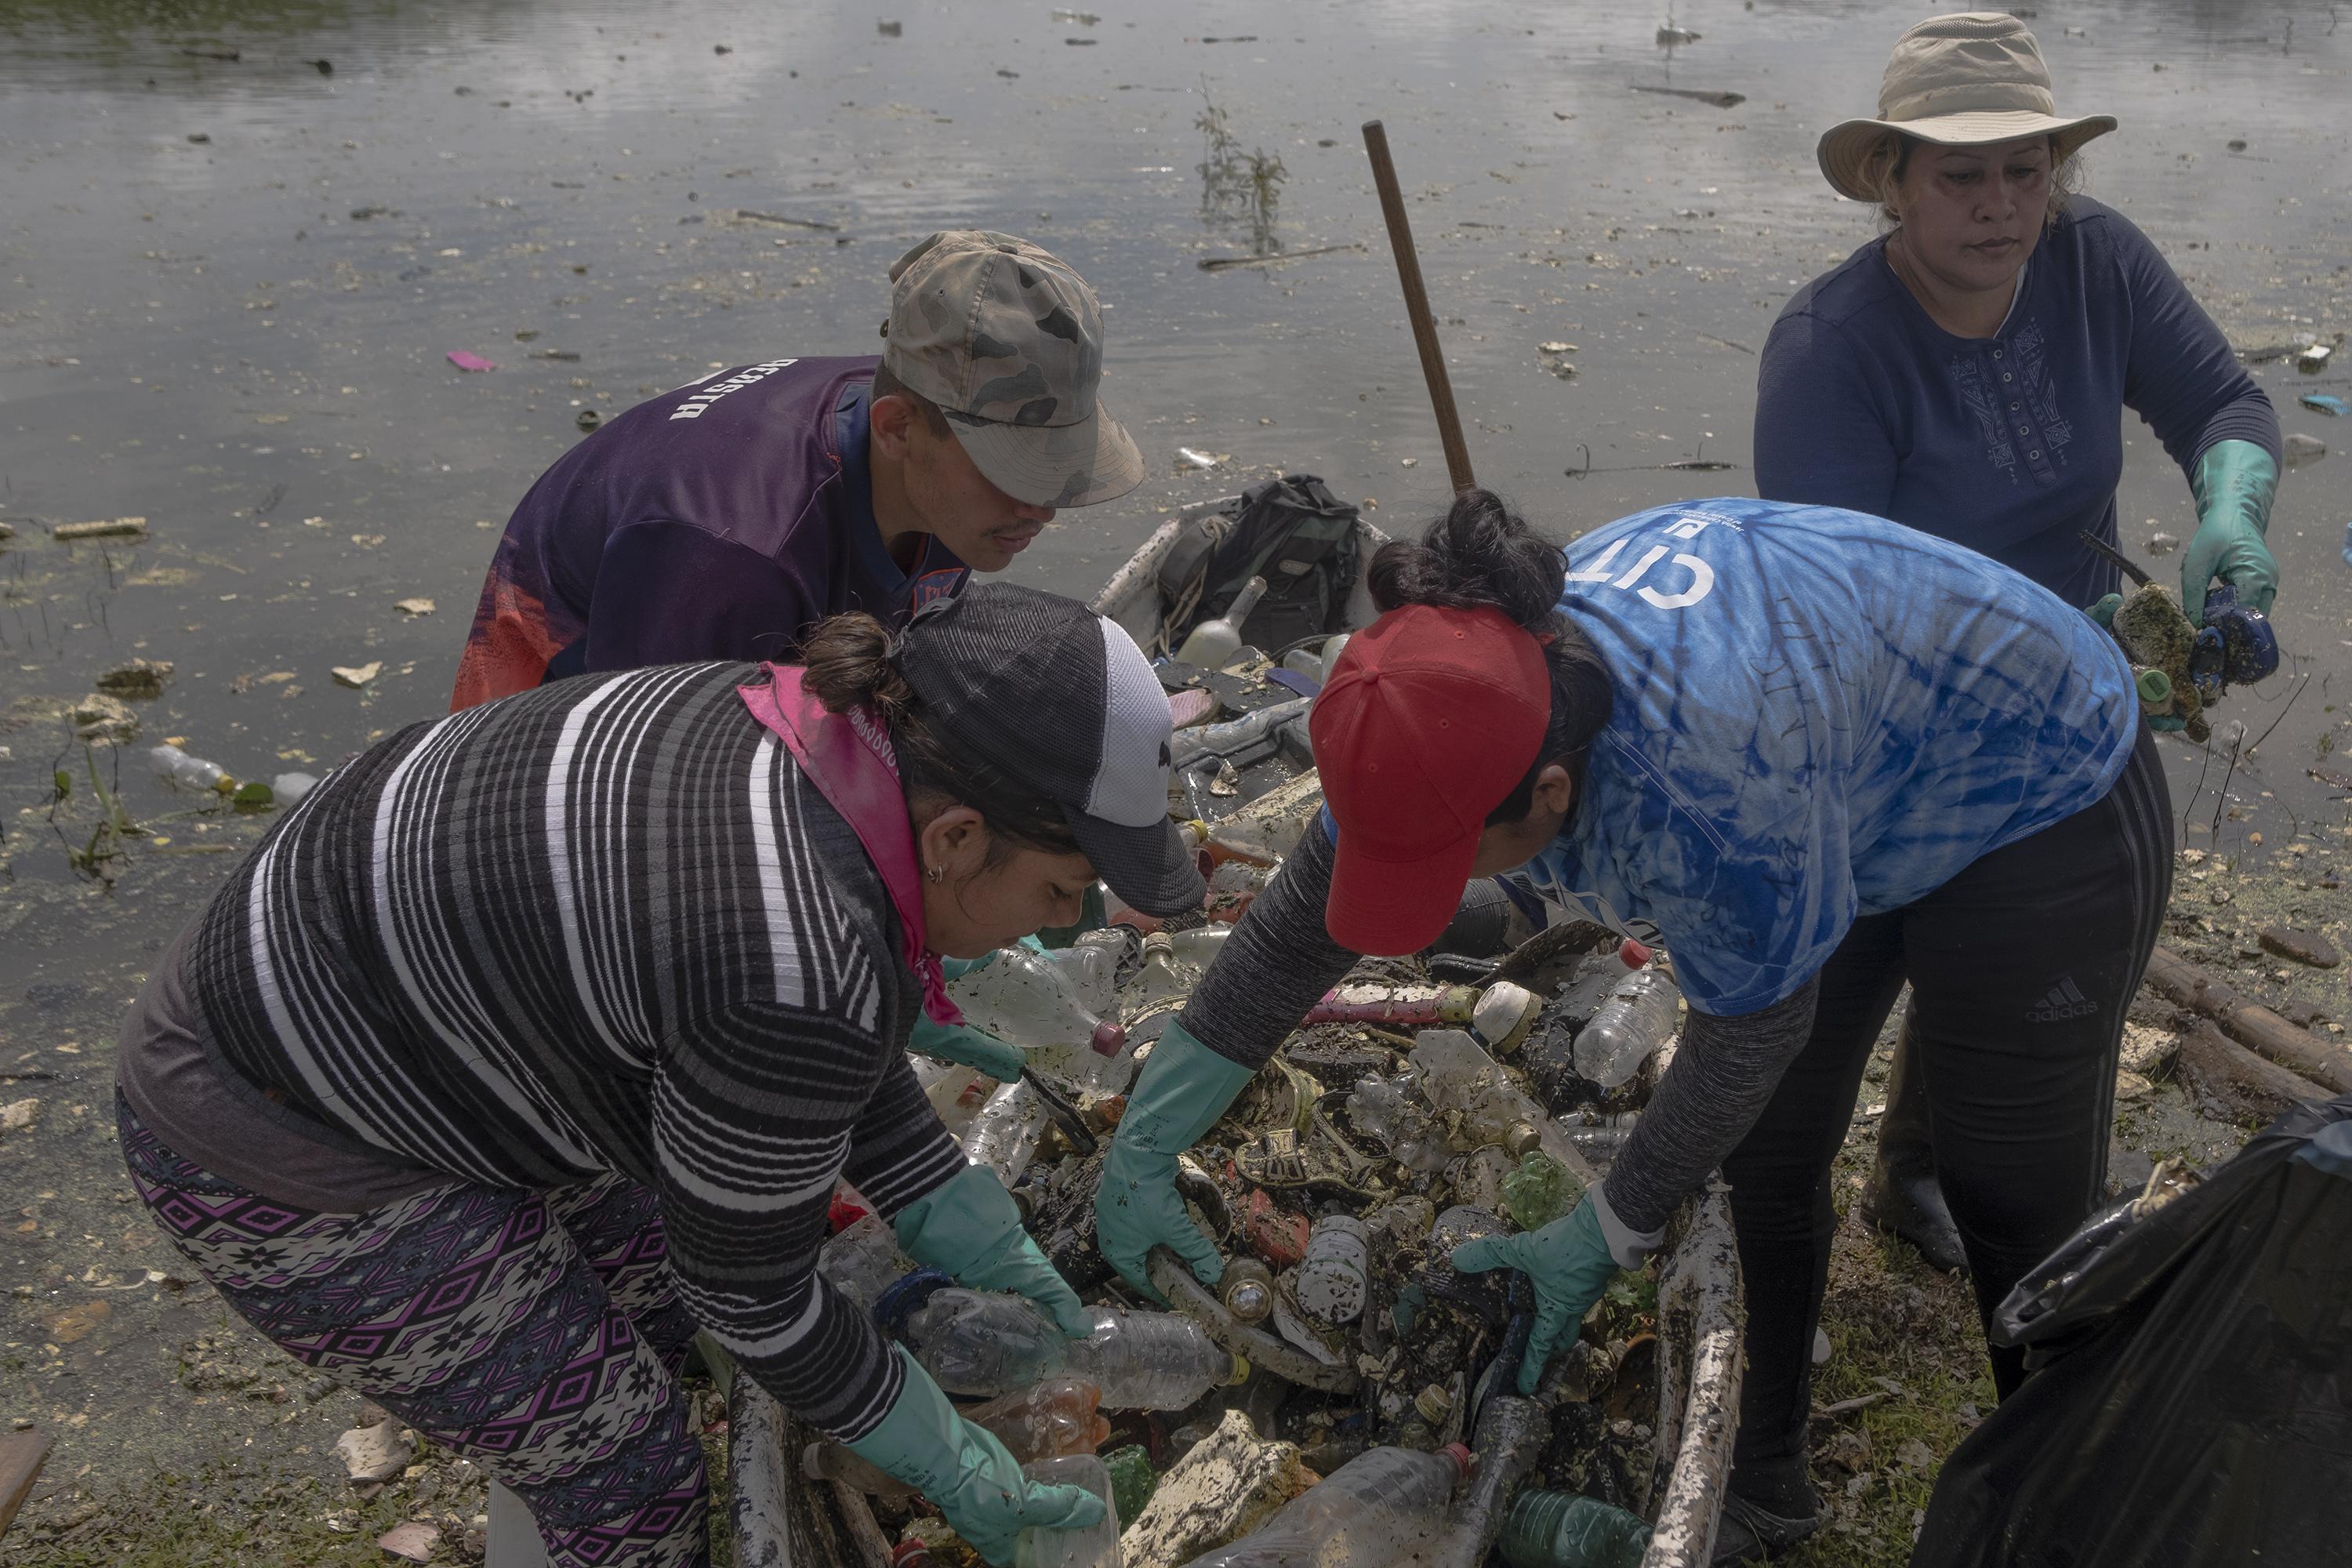 Potonico has cooperatives of farmers and fishers who work from 5:00 a.m. to noon cleaning the reservoir because the Lempa River is one of their families’ main sources of income. According to one of the community leaders, they started working to remove the waste even before the Mayor